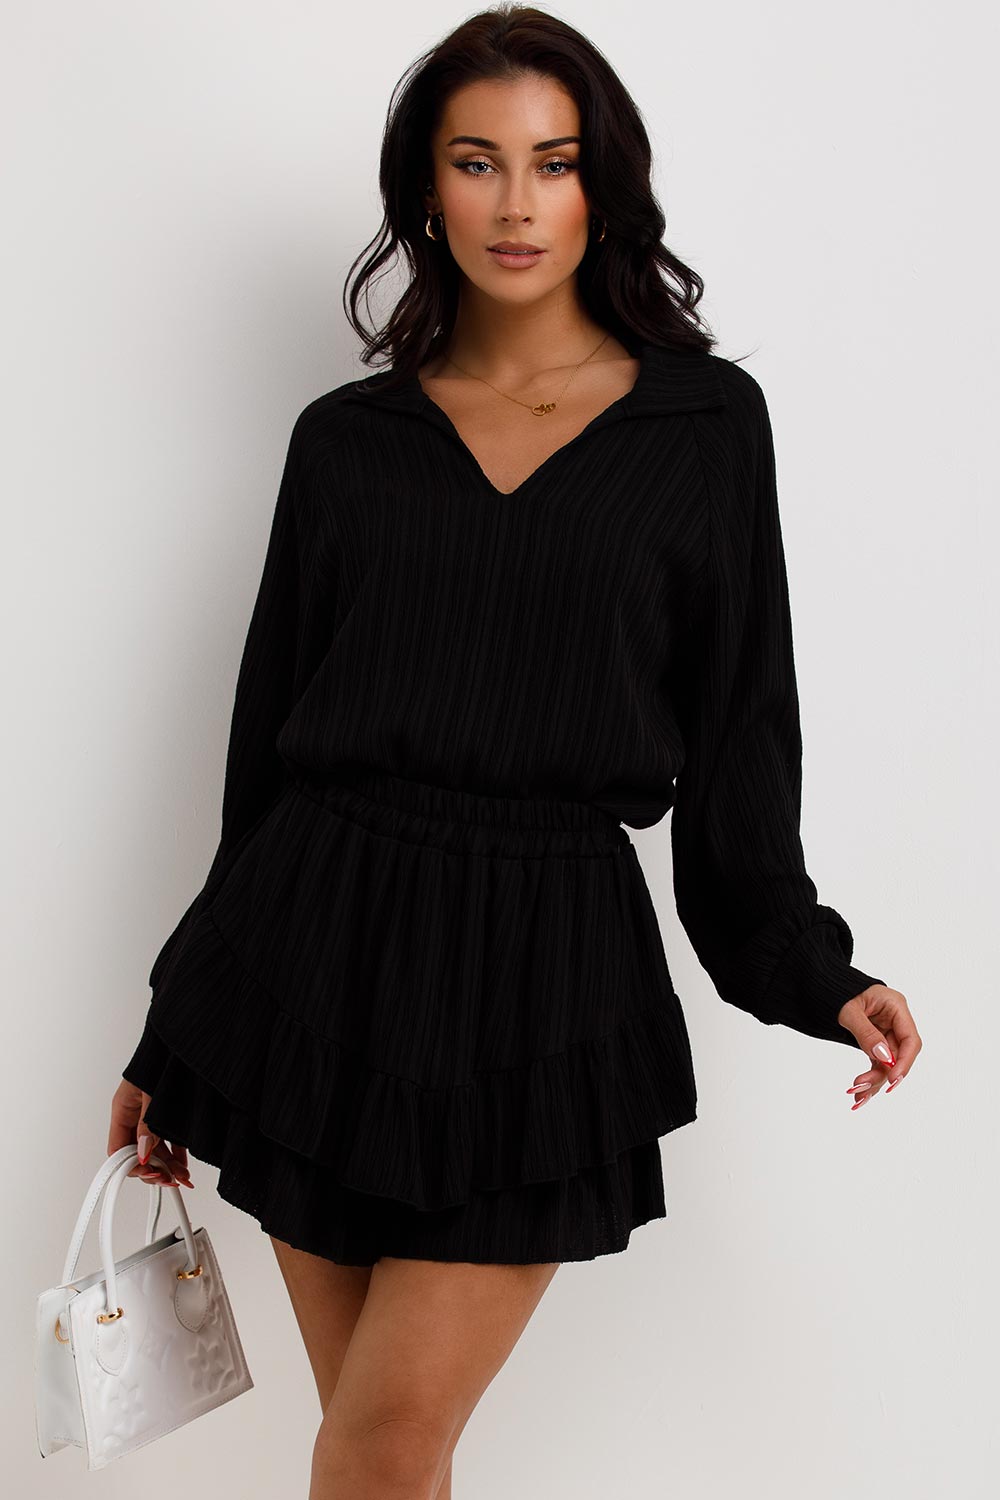 womens black shirt and shorts two piece set summer holiday outfit